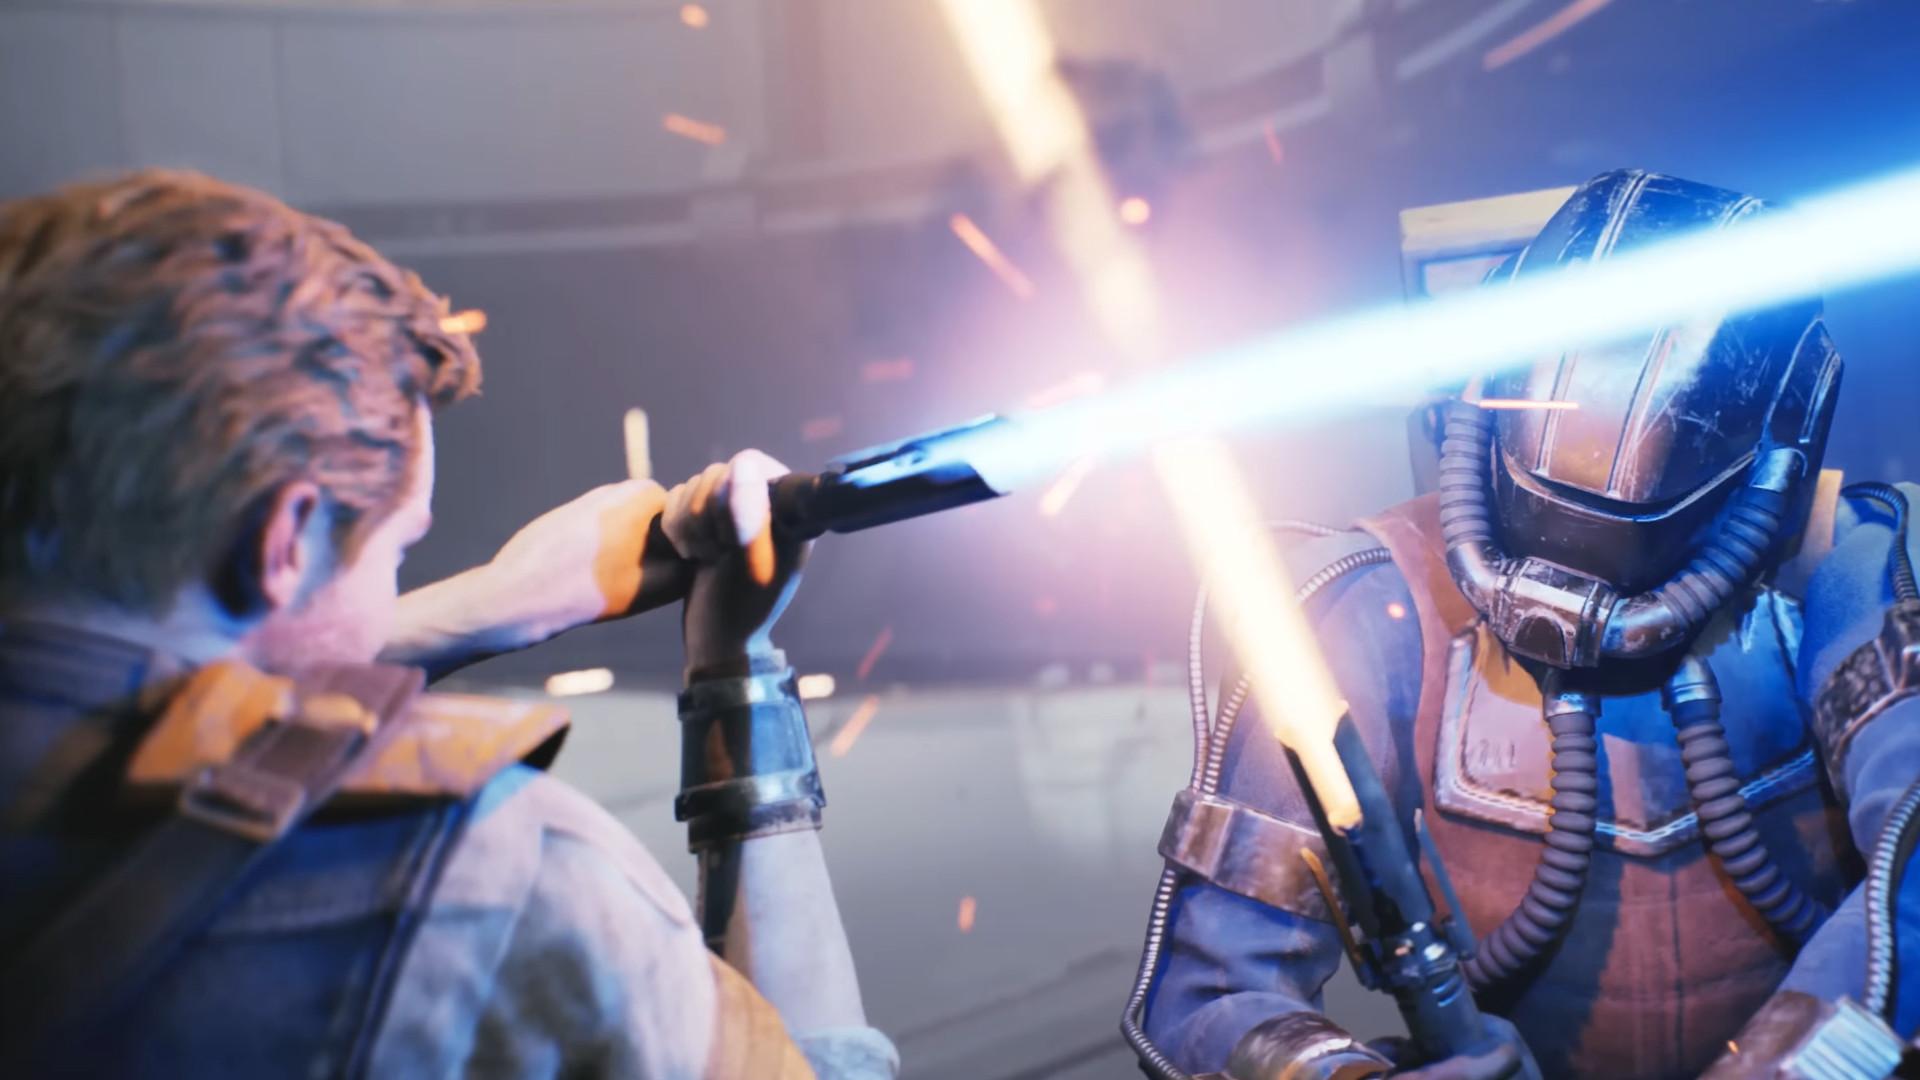 Star Wars Jedi: Survivor PS5 Patch Out Now, Promises Improved Performance  and Crash Fixes